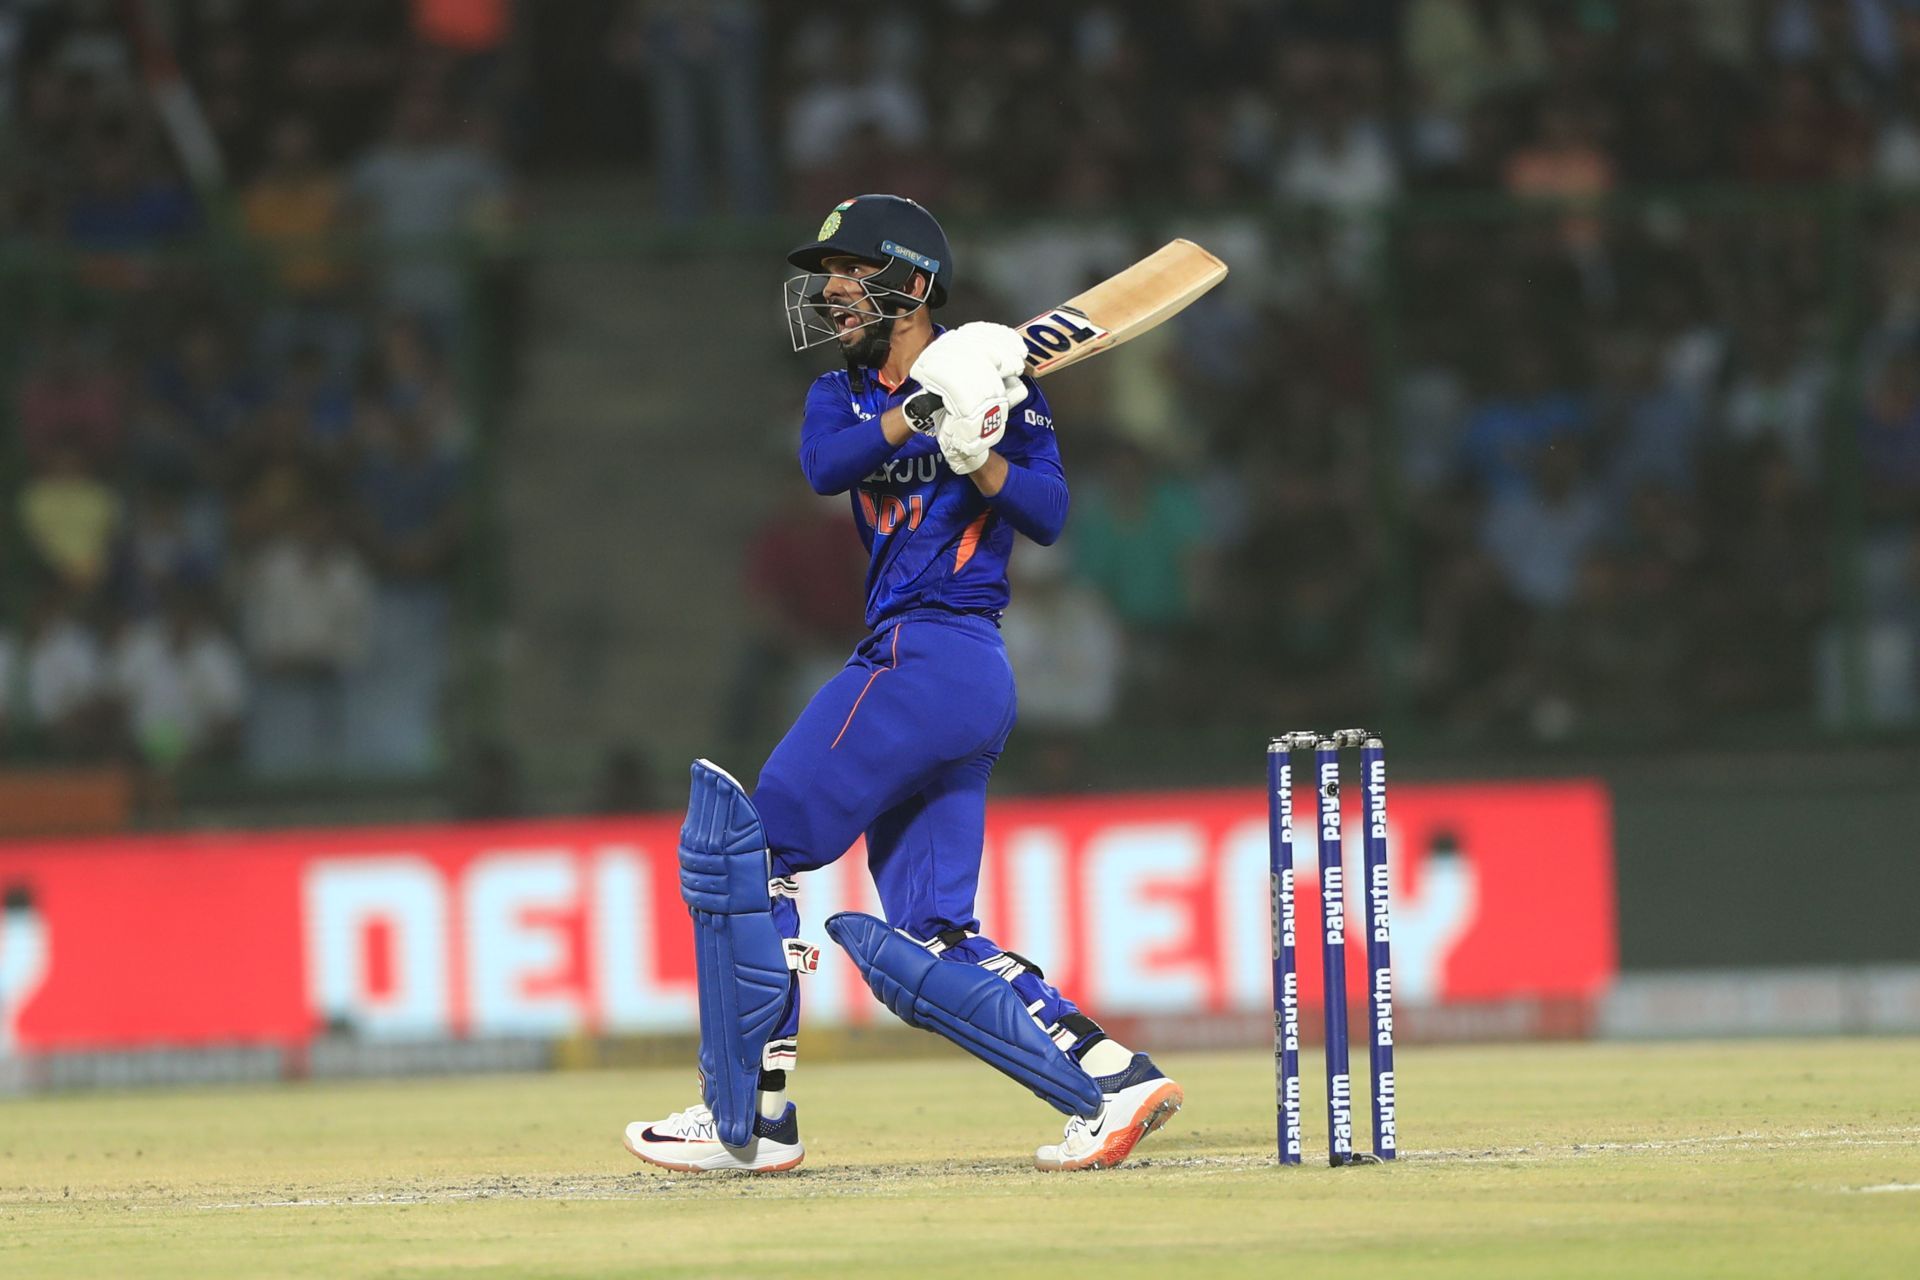 Ruturaj Gaikwad was dismissed cheaply in the second T20I against South Africa